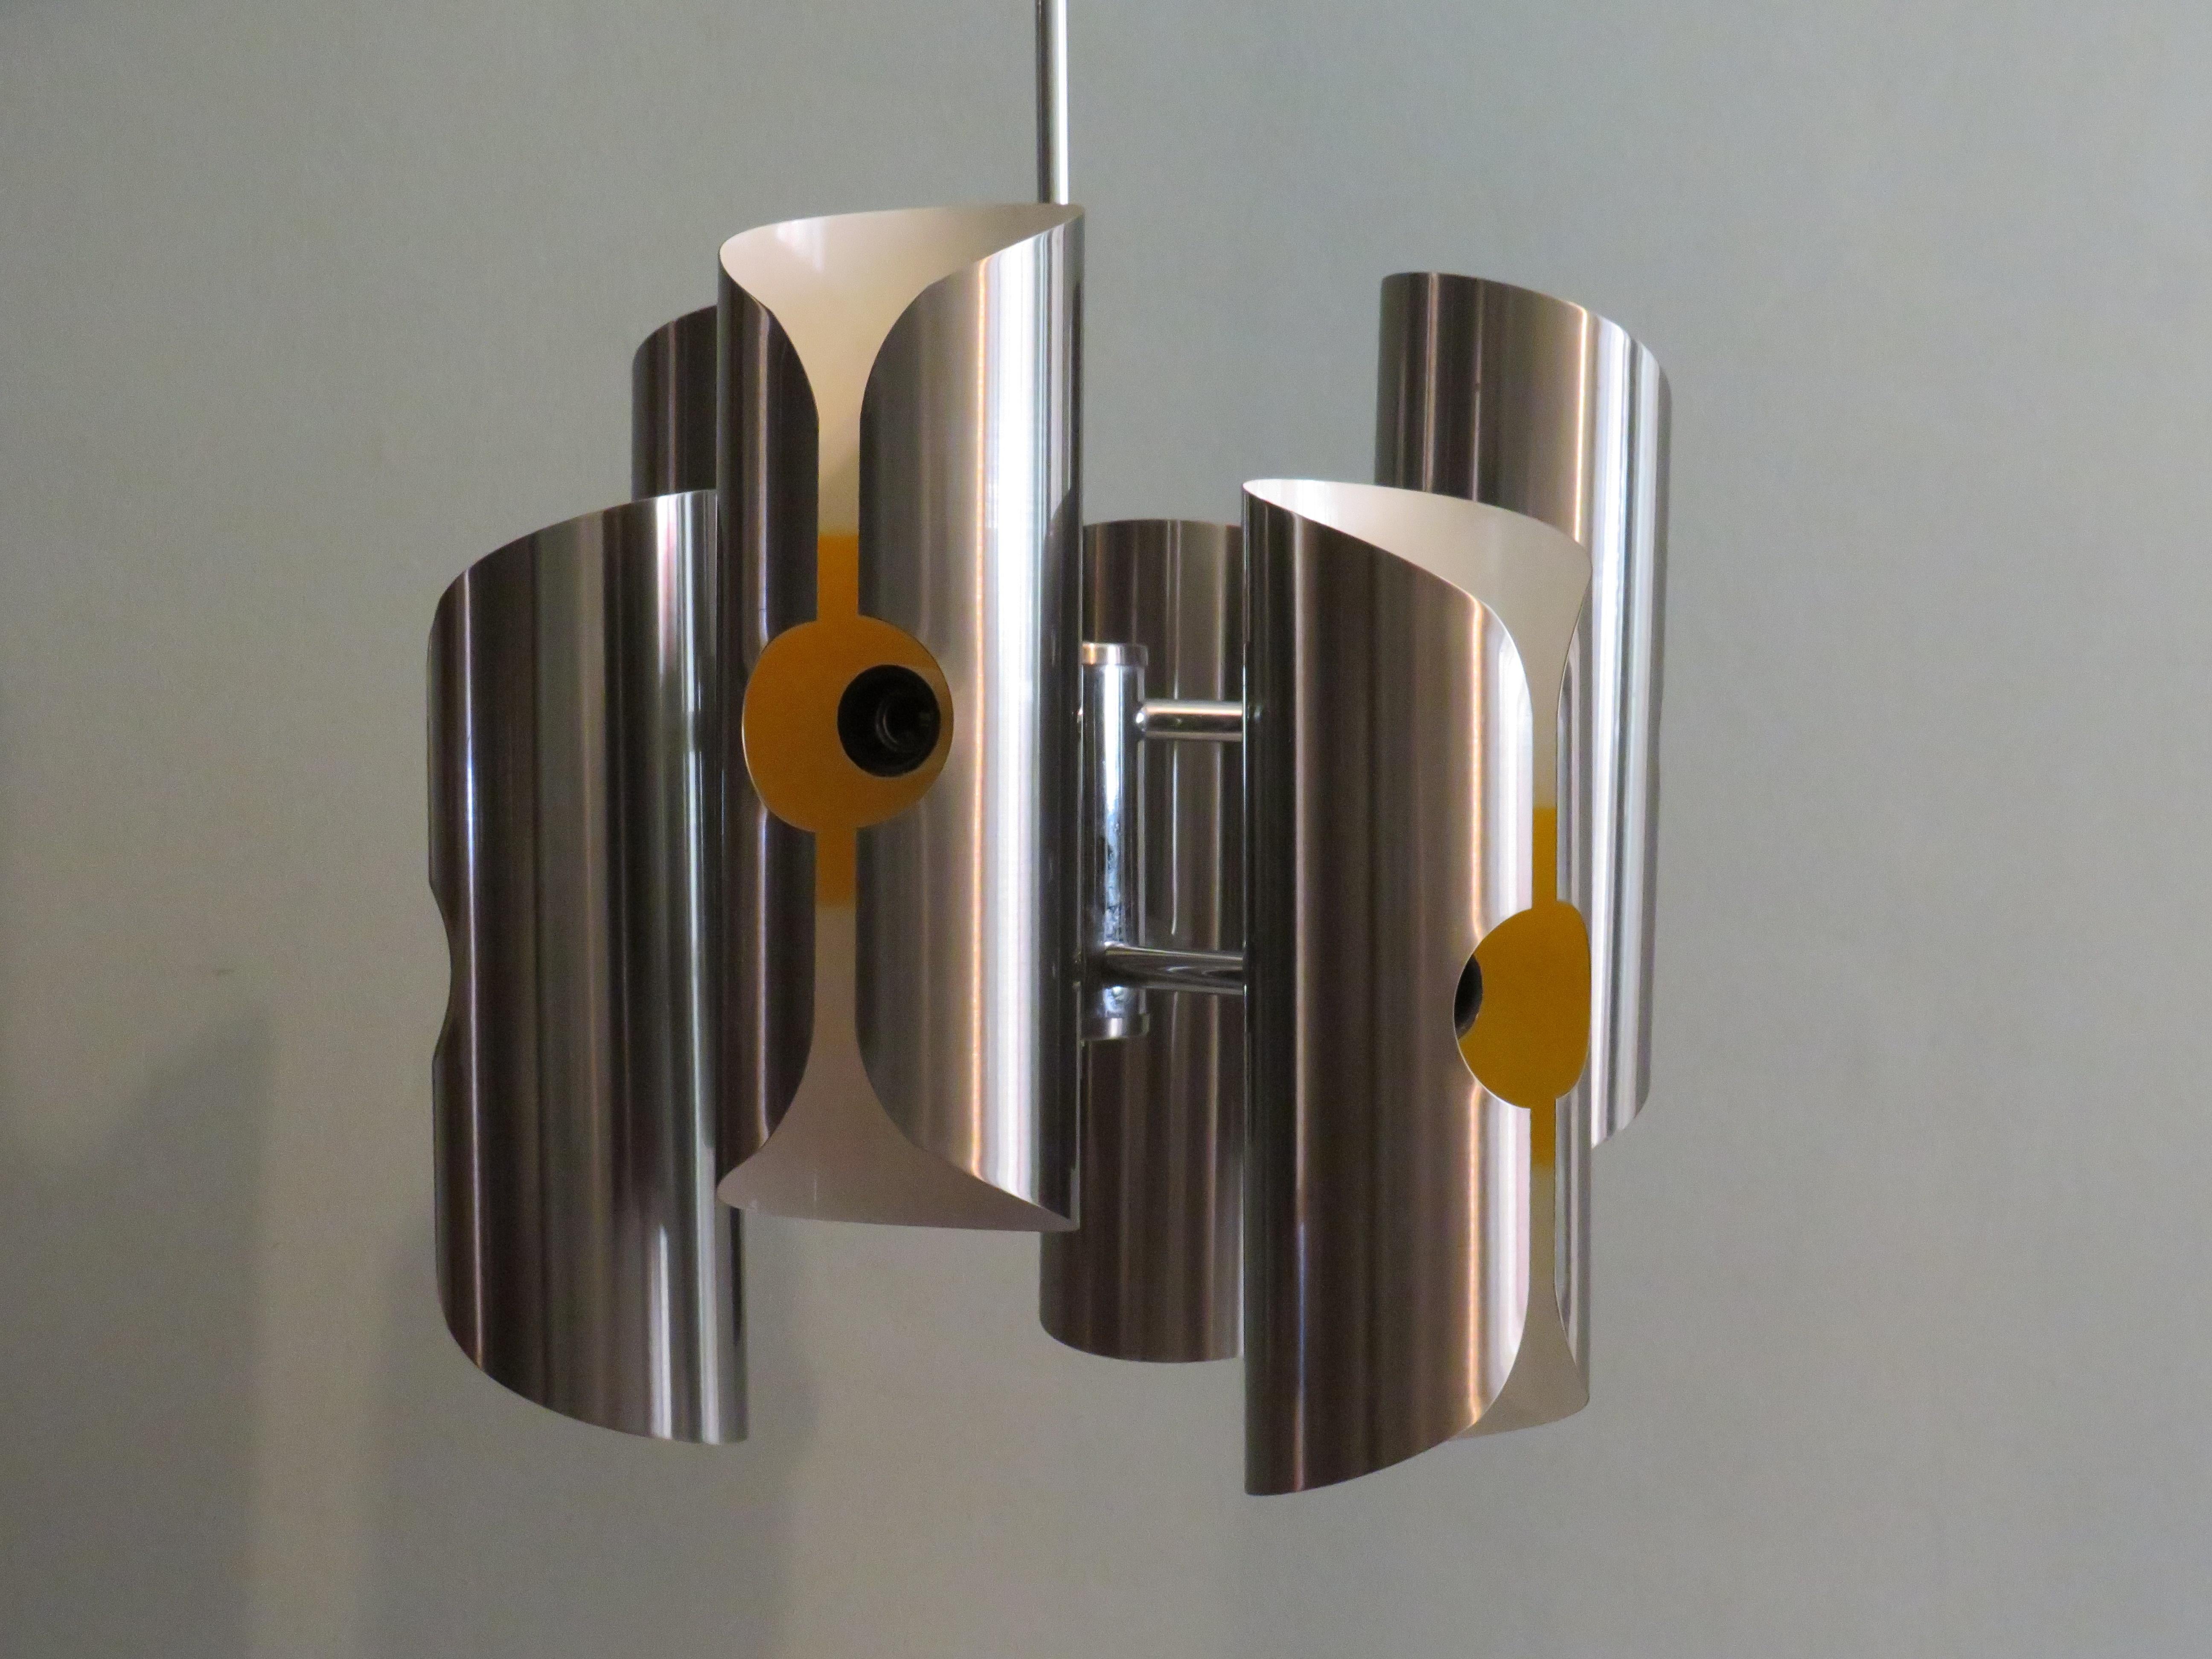 Chandelier with chrome frame and 6 pleated sleeves in brushed stainless steel with a partial yellow interior.
The chandelier is in good vintage condition and is complete with hanging system and ceiling cap.
The maximum height with hanging system